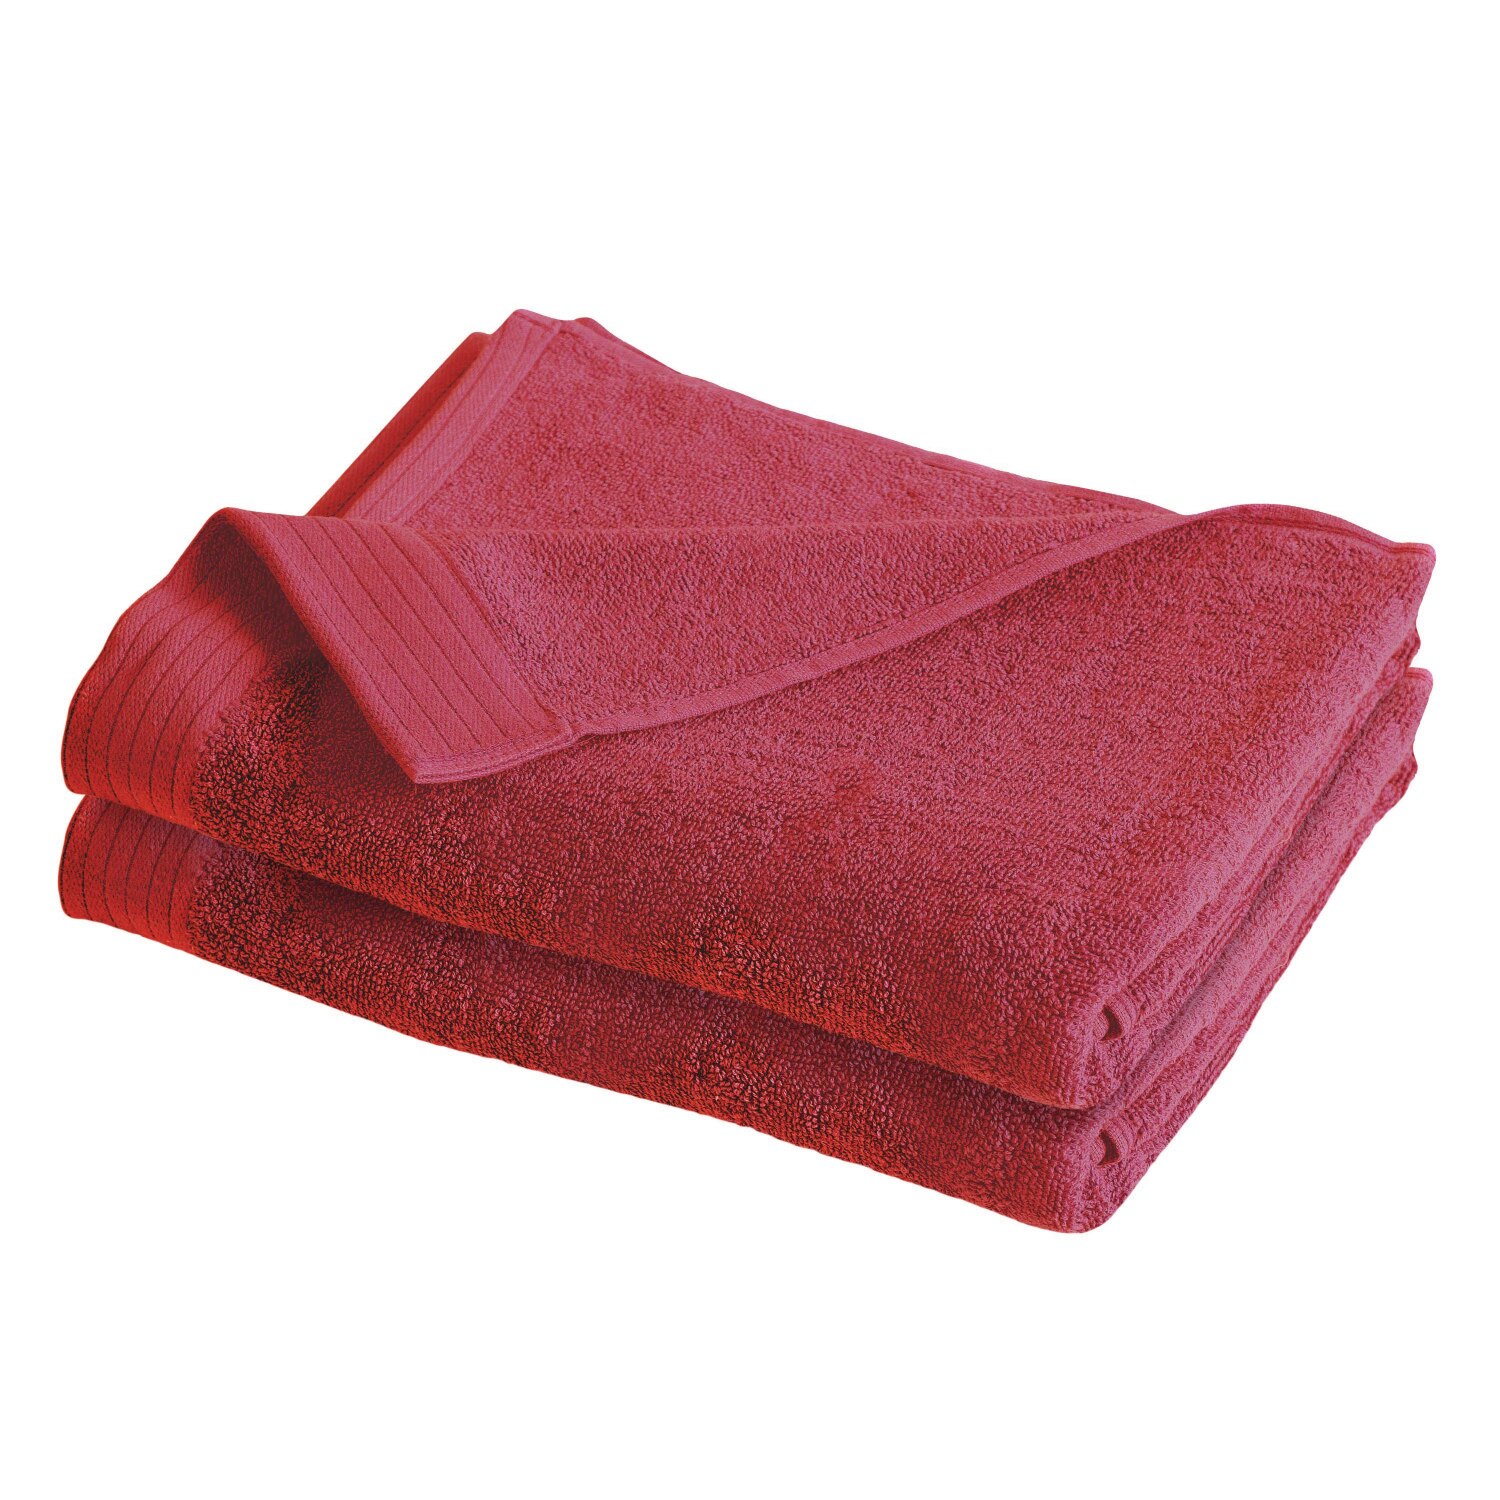 IZOD Everyday Red 4 Pack Bath Towels